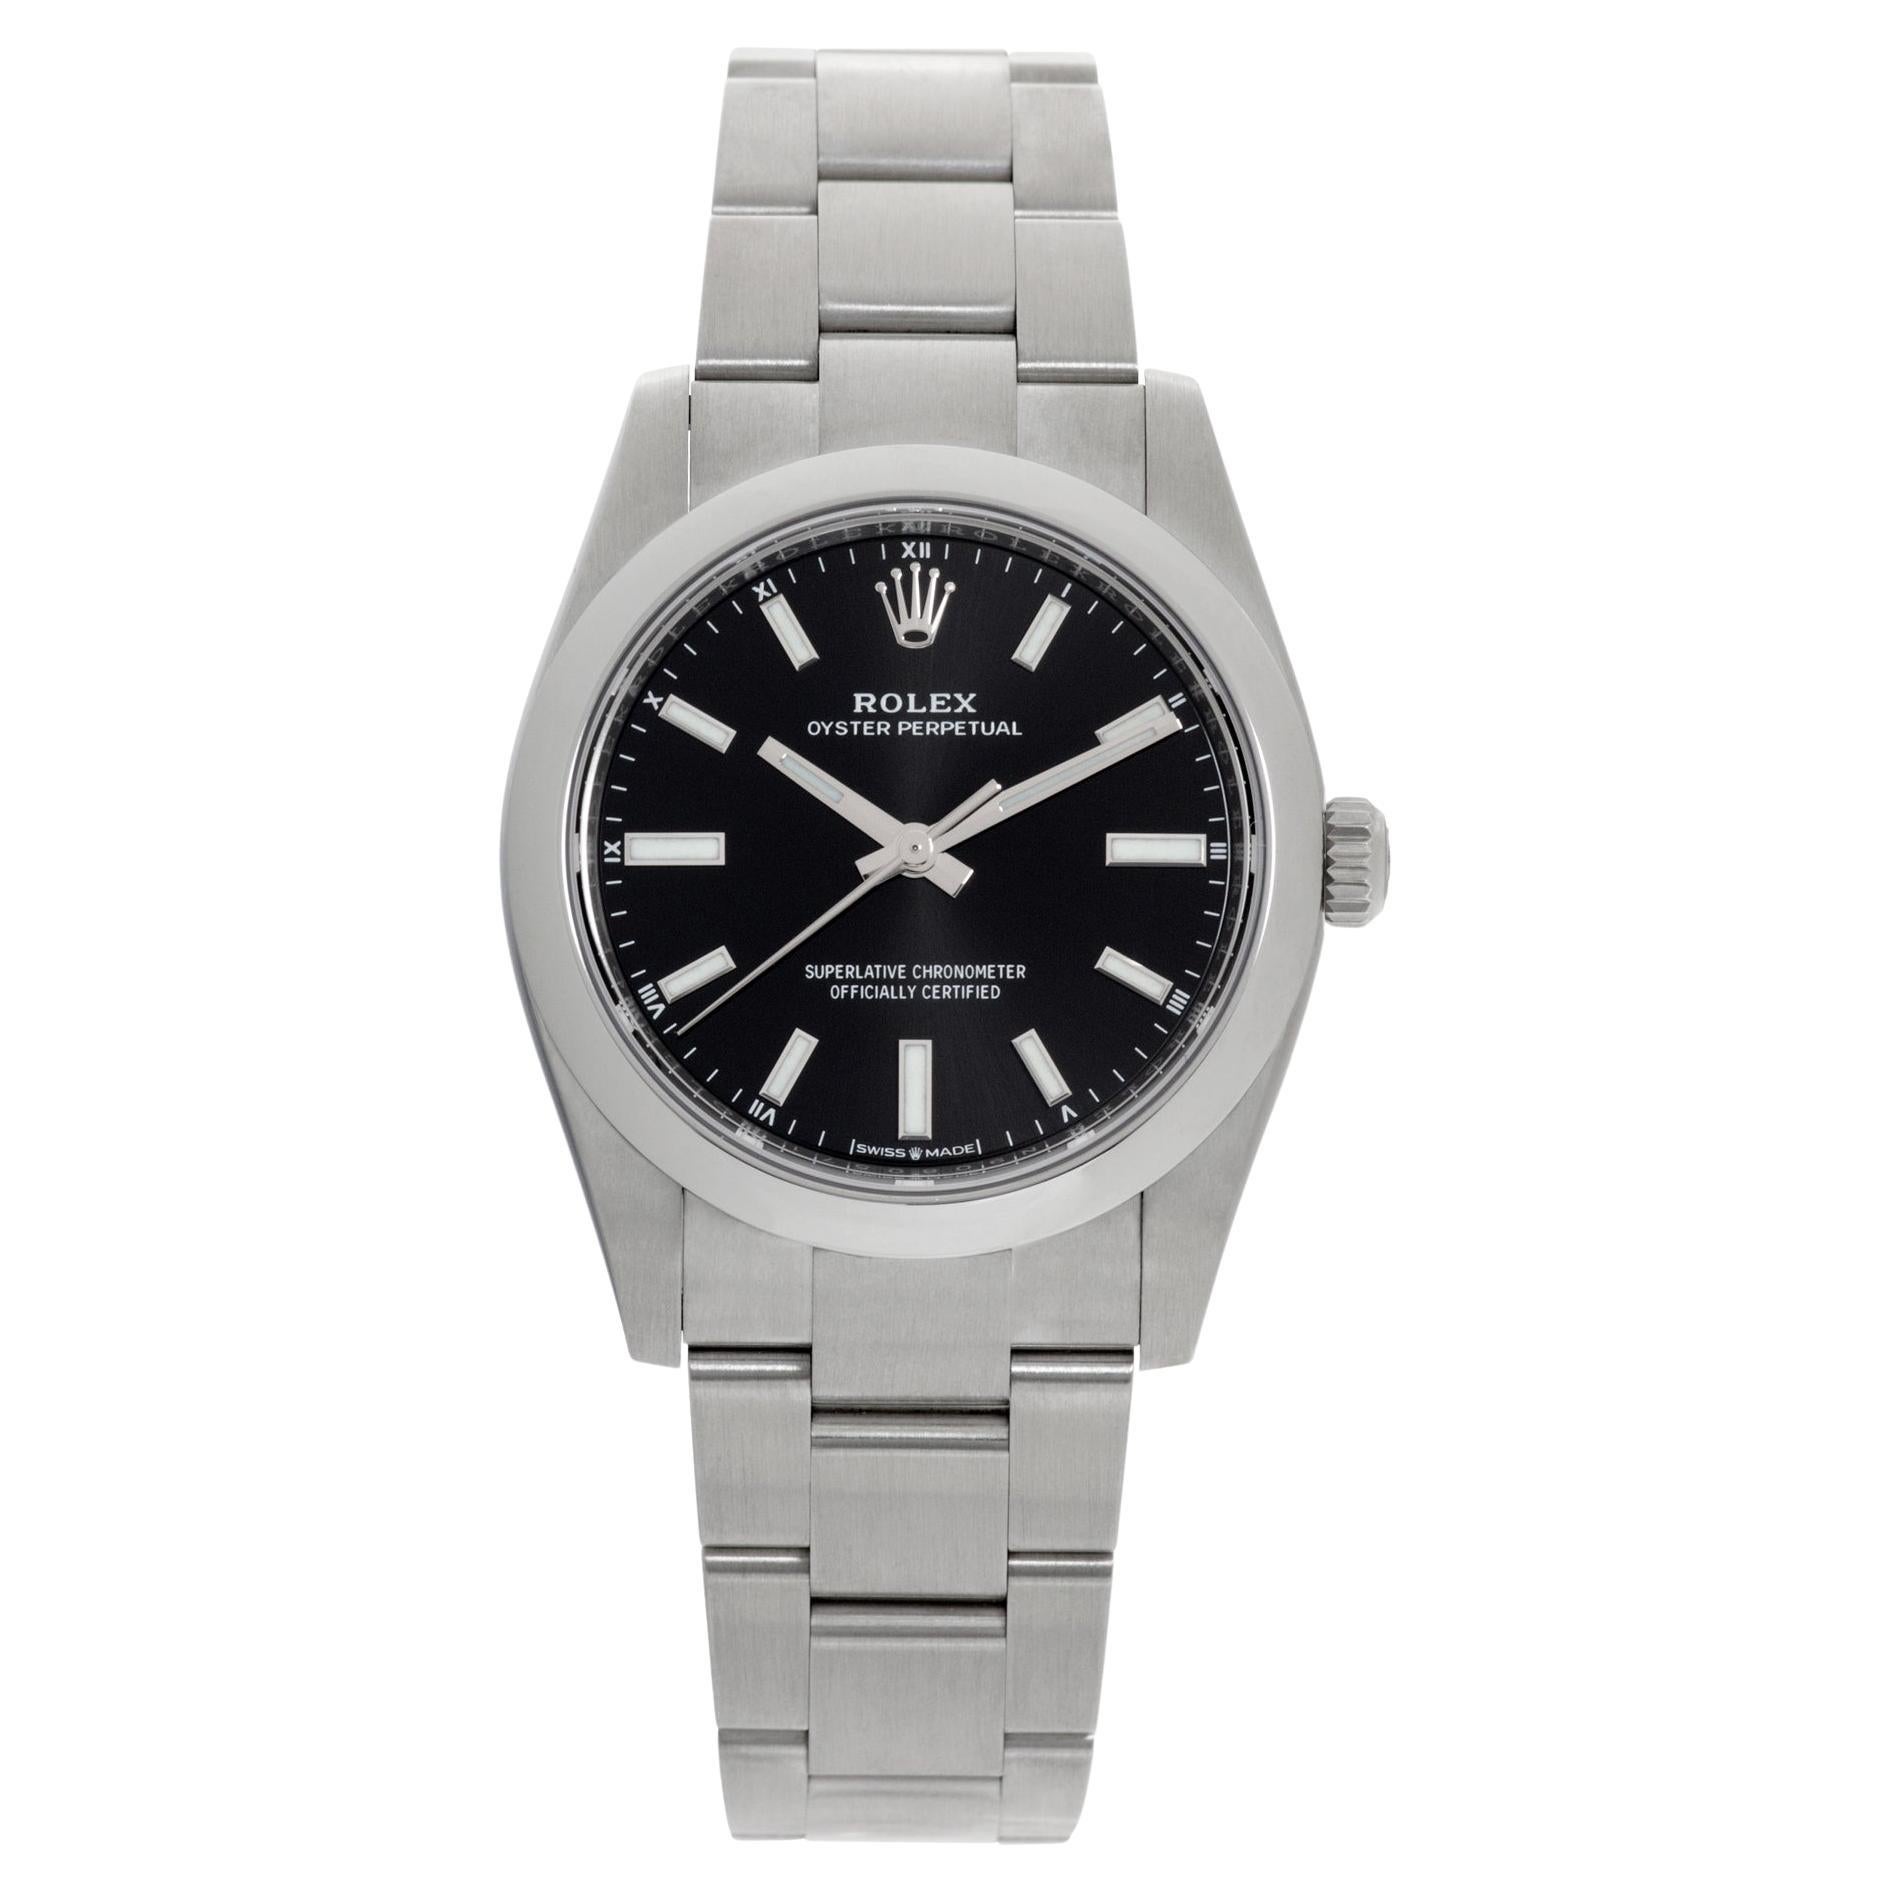 Unused Rolex Oyster Perpetual 124200 For Sale